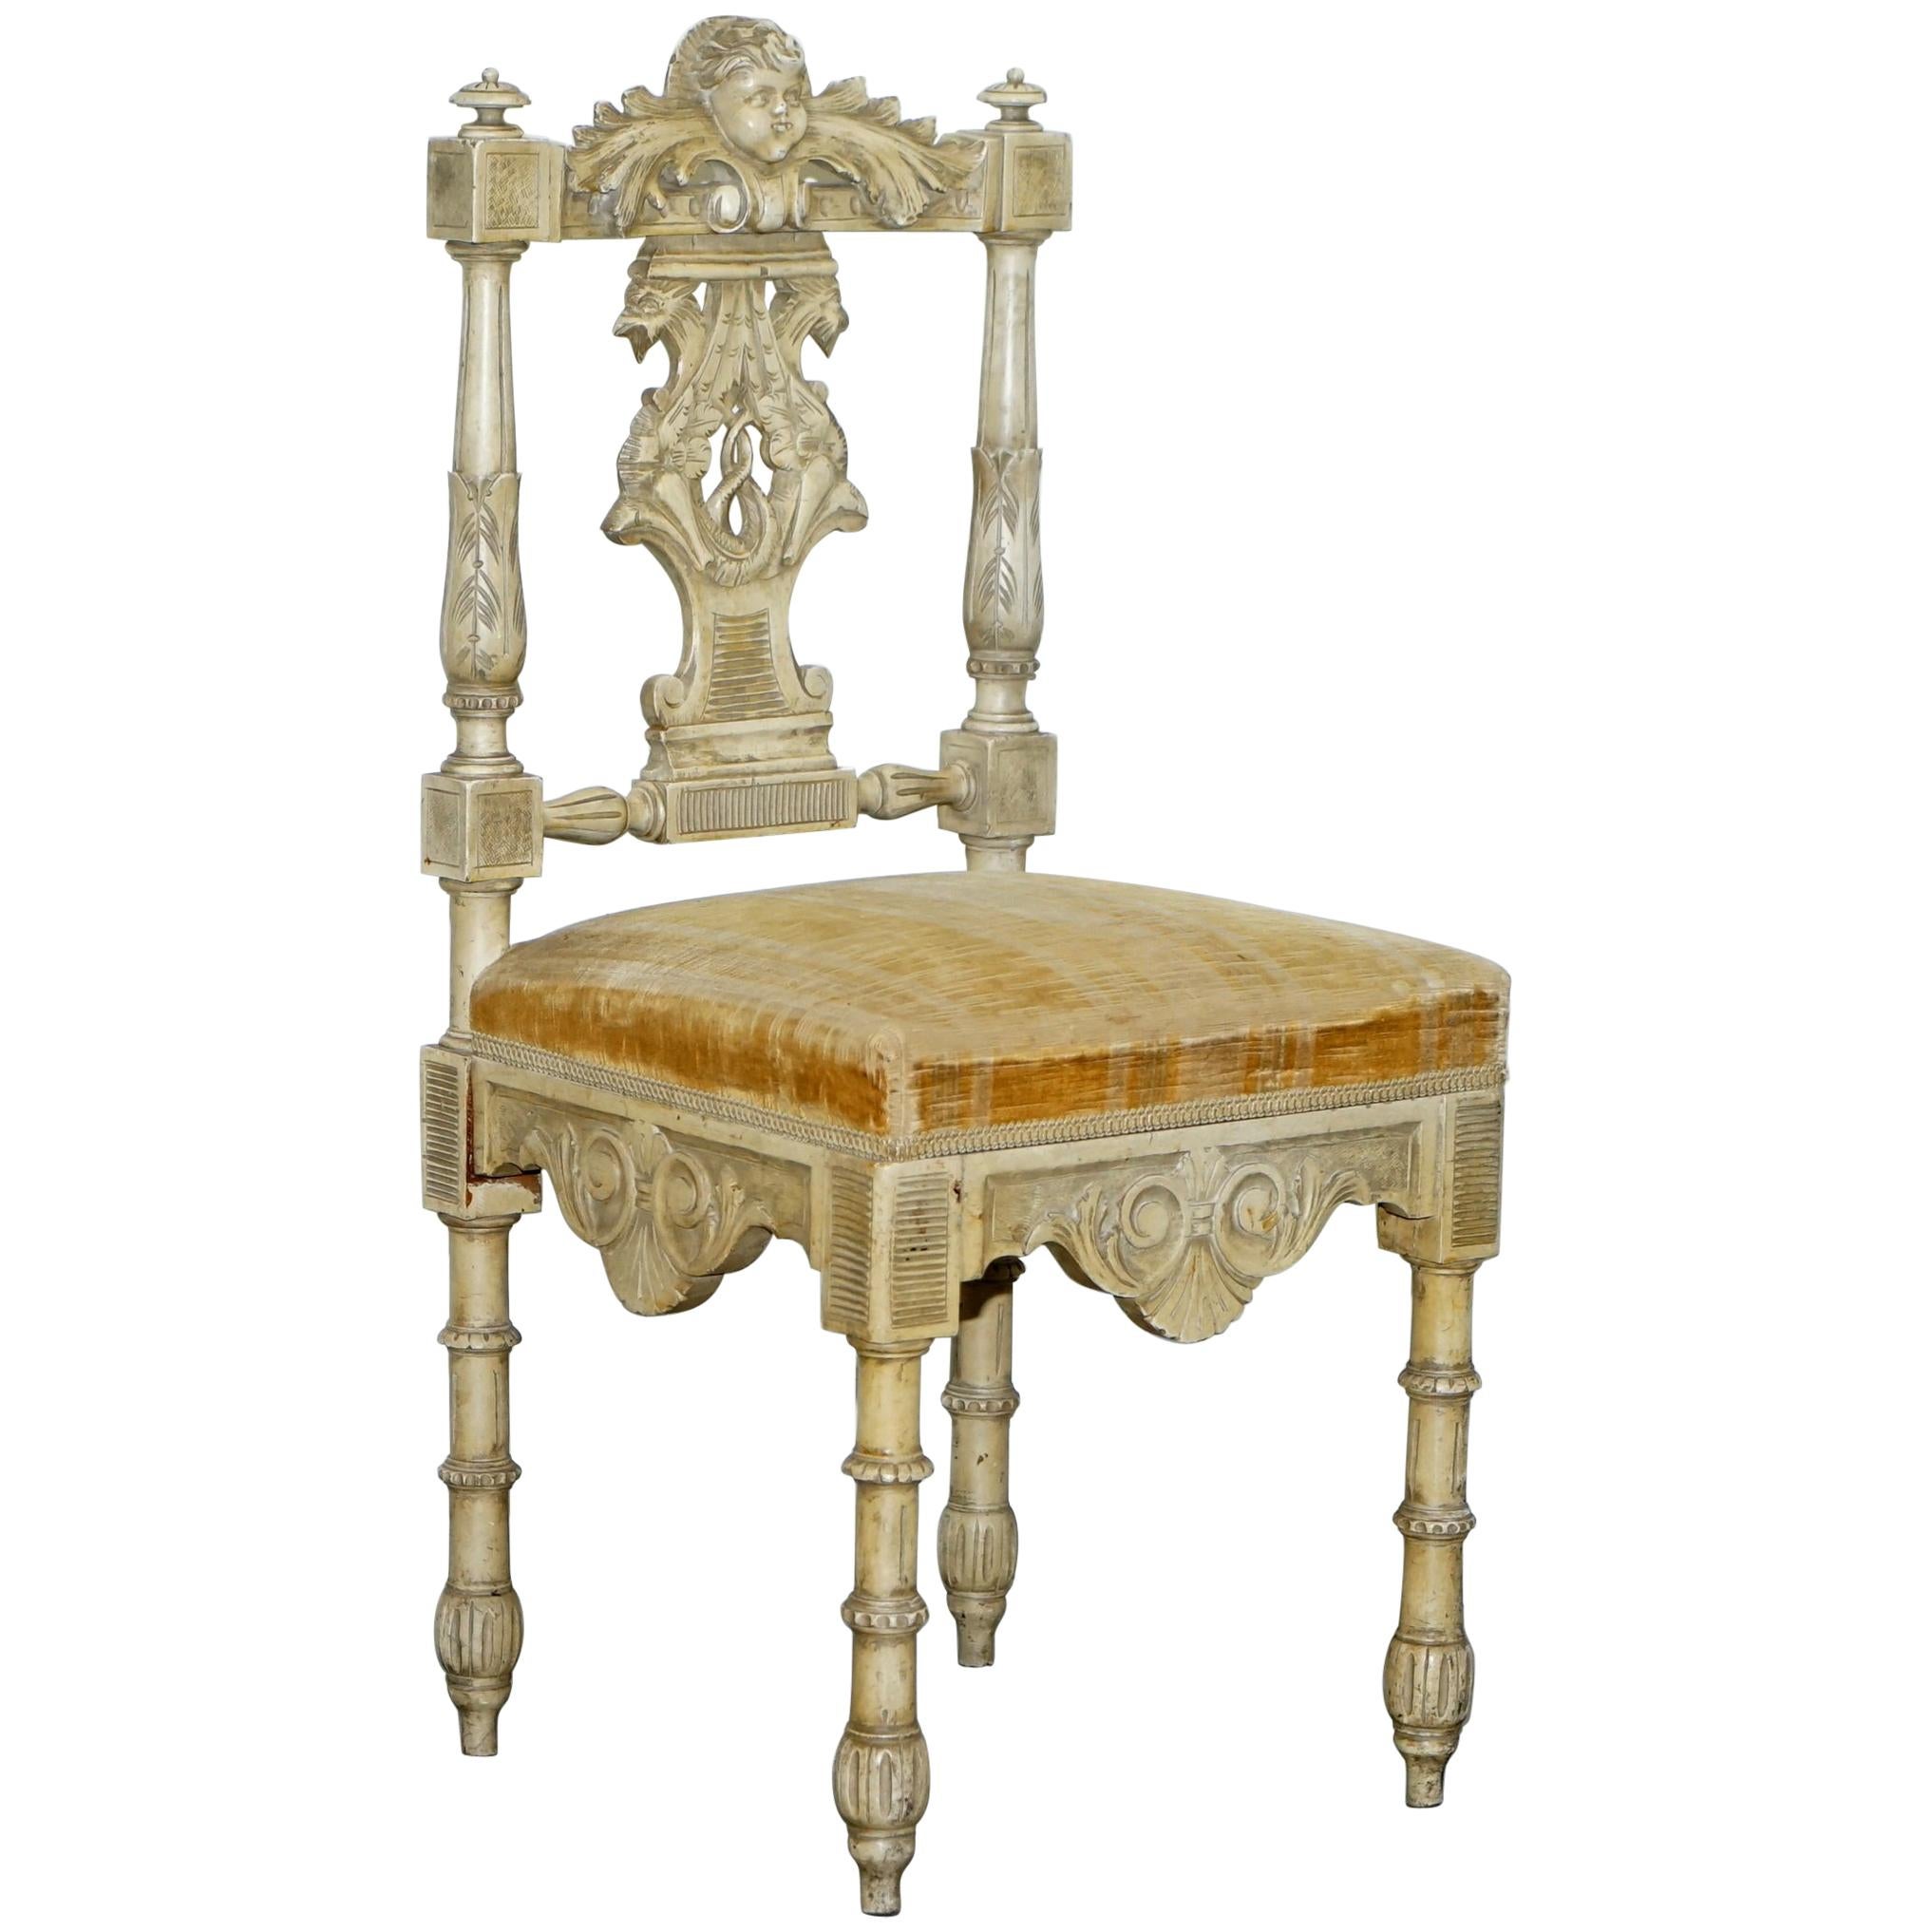 Stunning Antique French Louis Carved Occasional Chair with Cherub Detailing